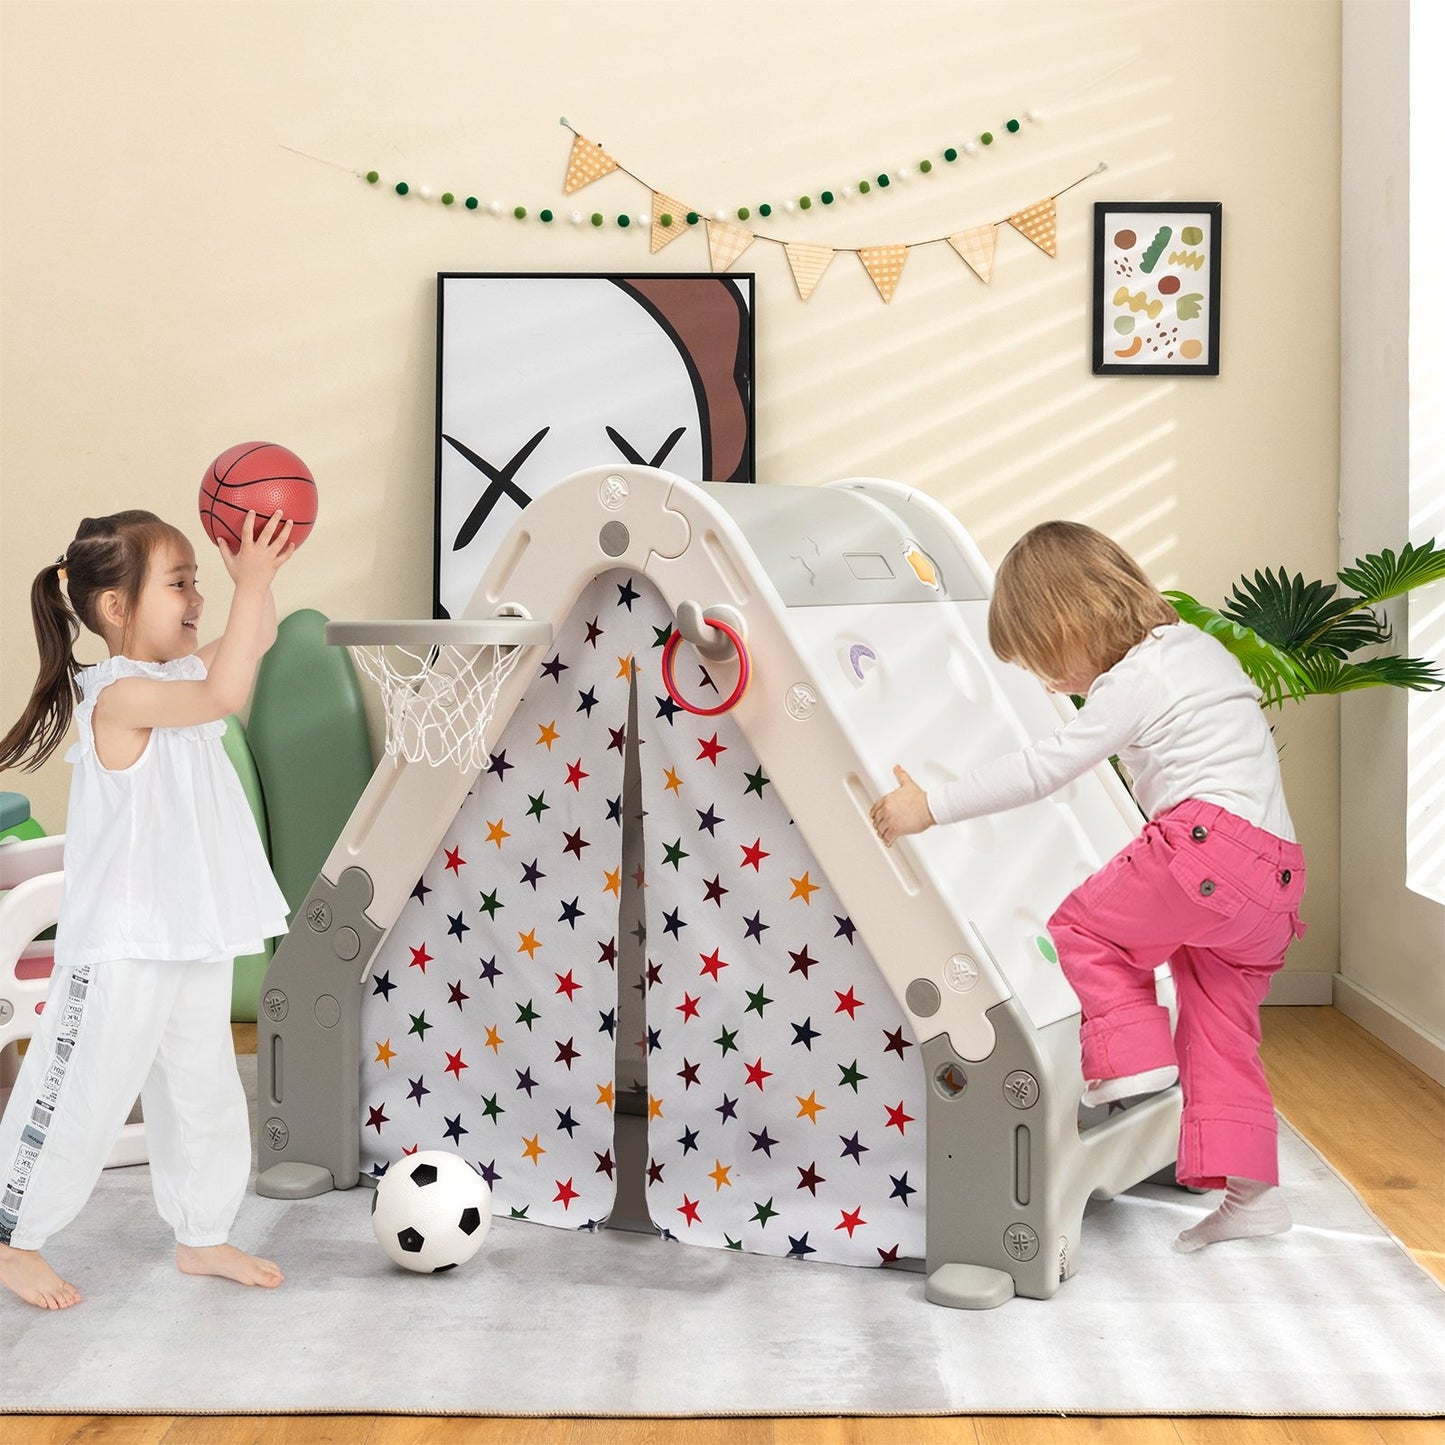 Kid's Triangle Climber with Tent Cover and with Climbing Wall, Gray